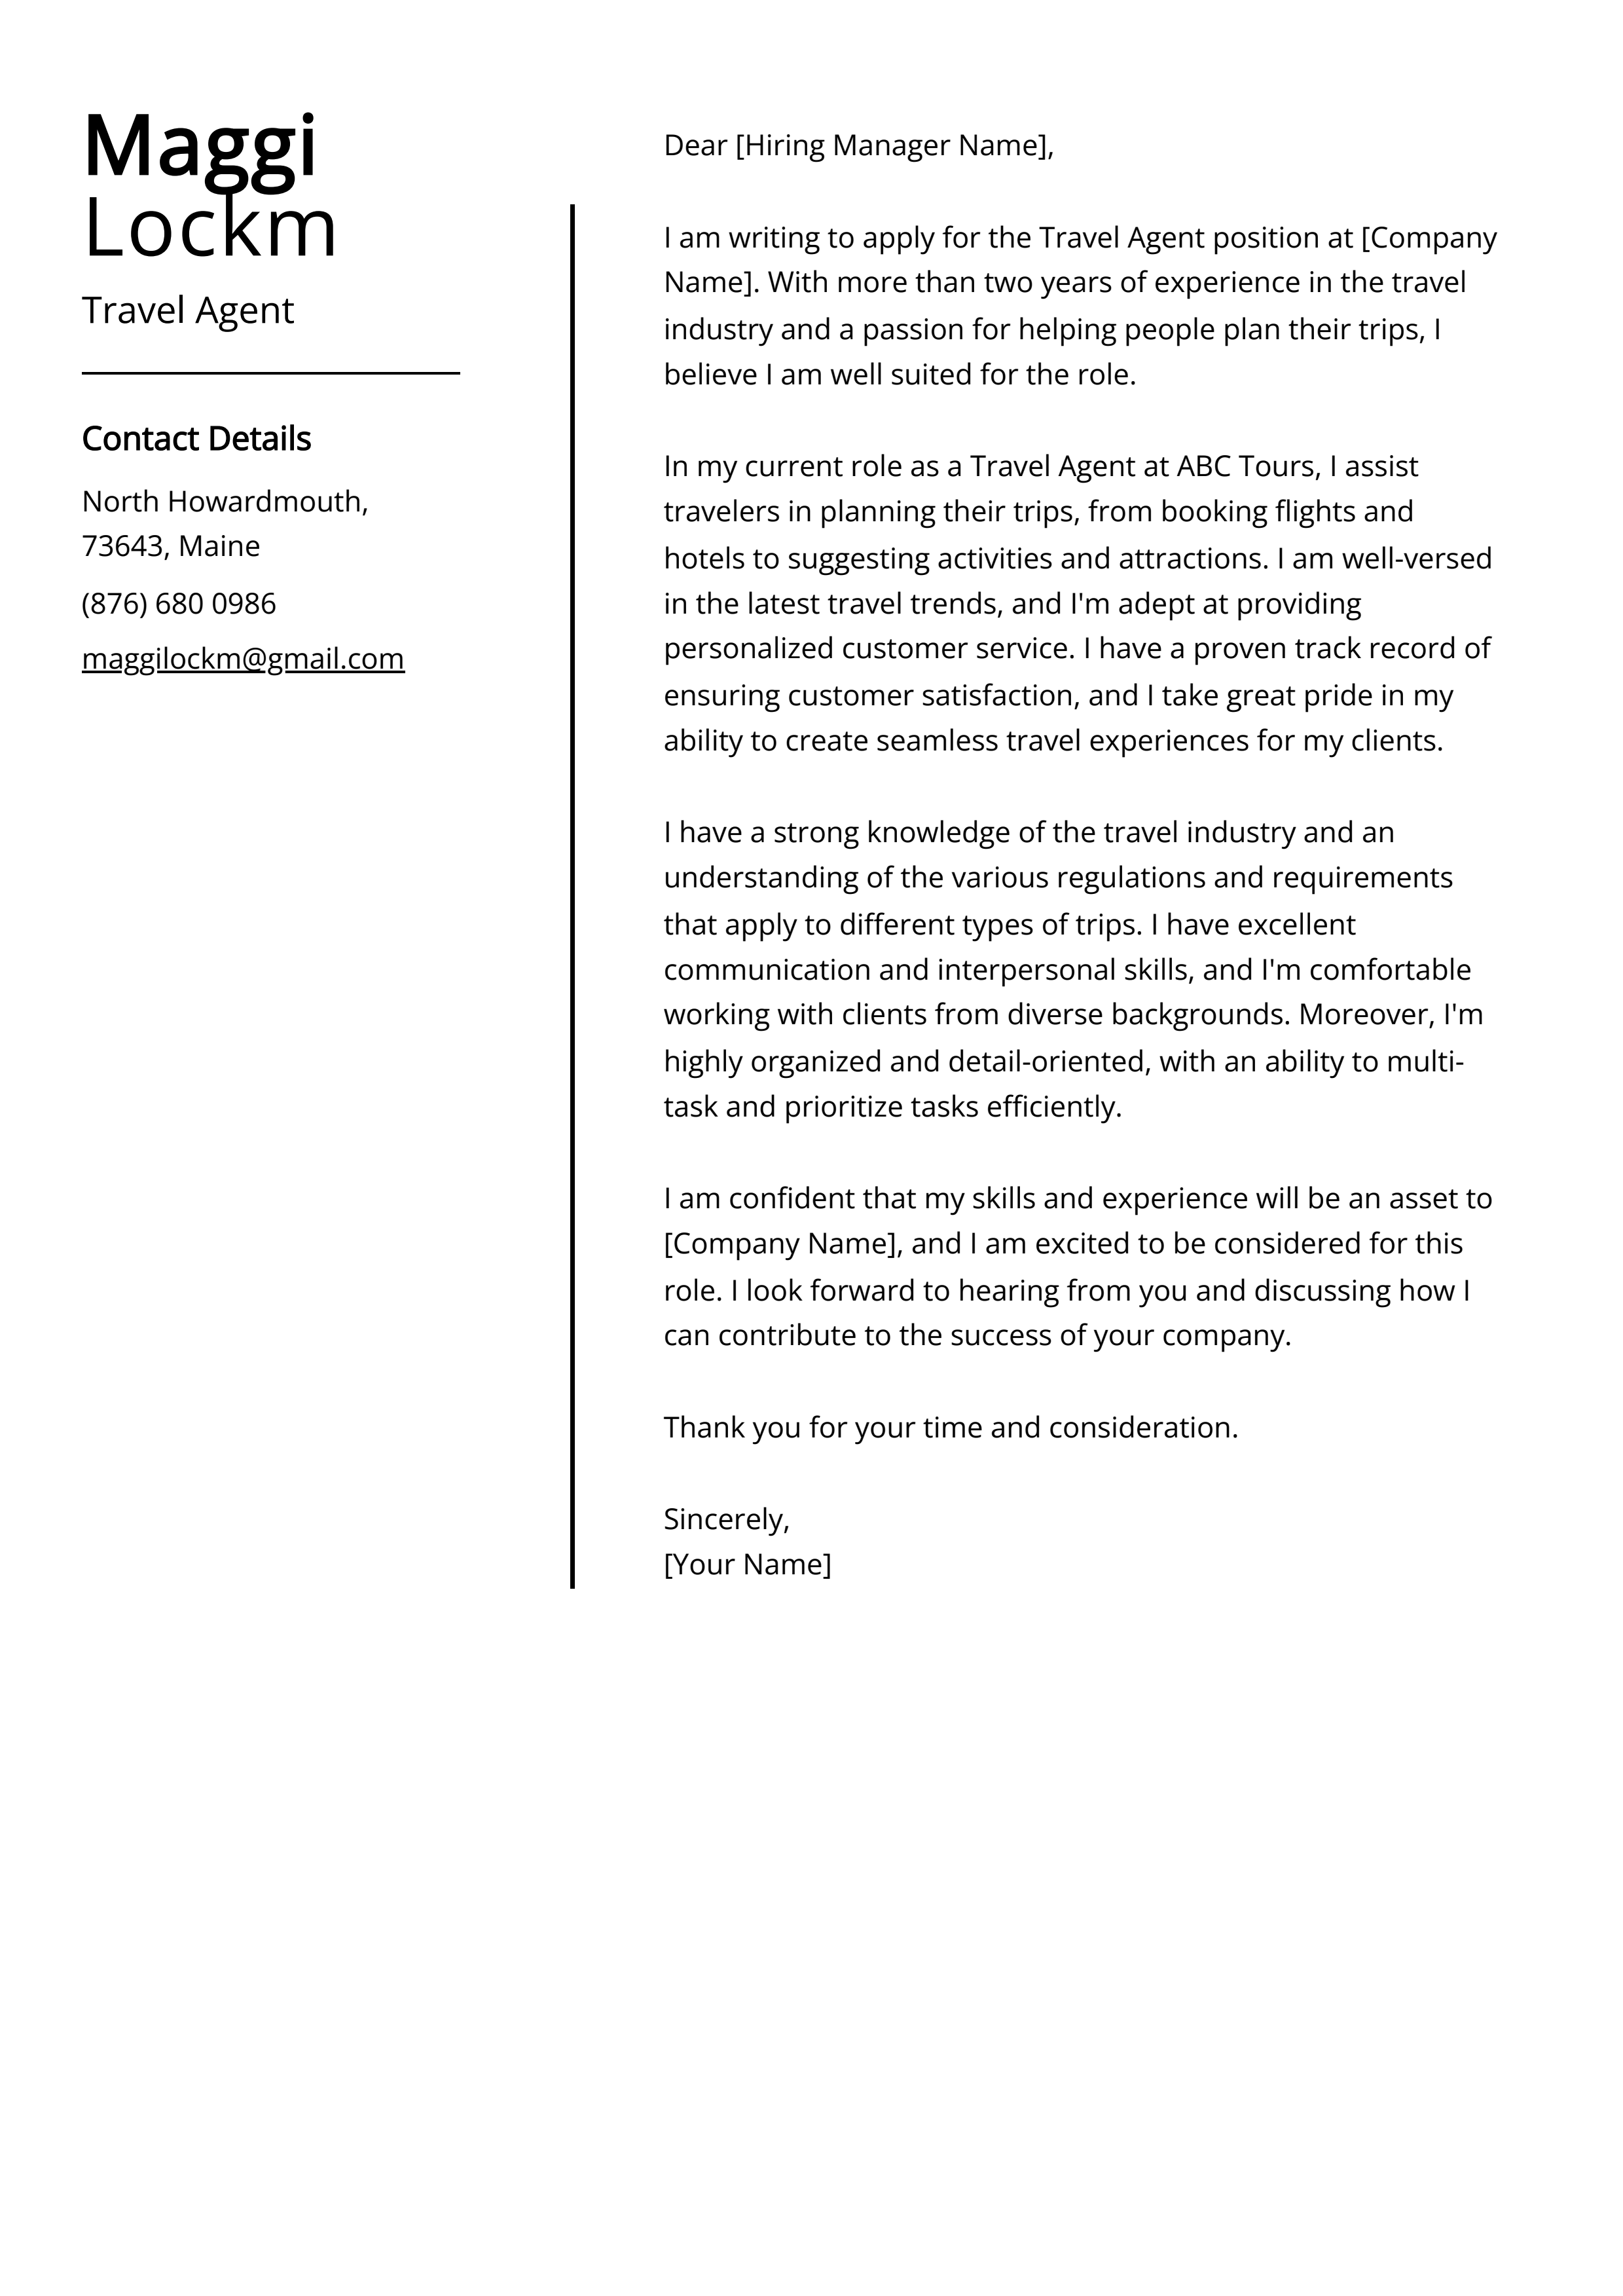 Experienced Travel Agent Cover Letter Example